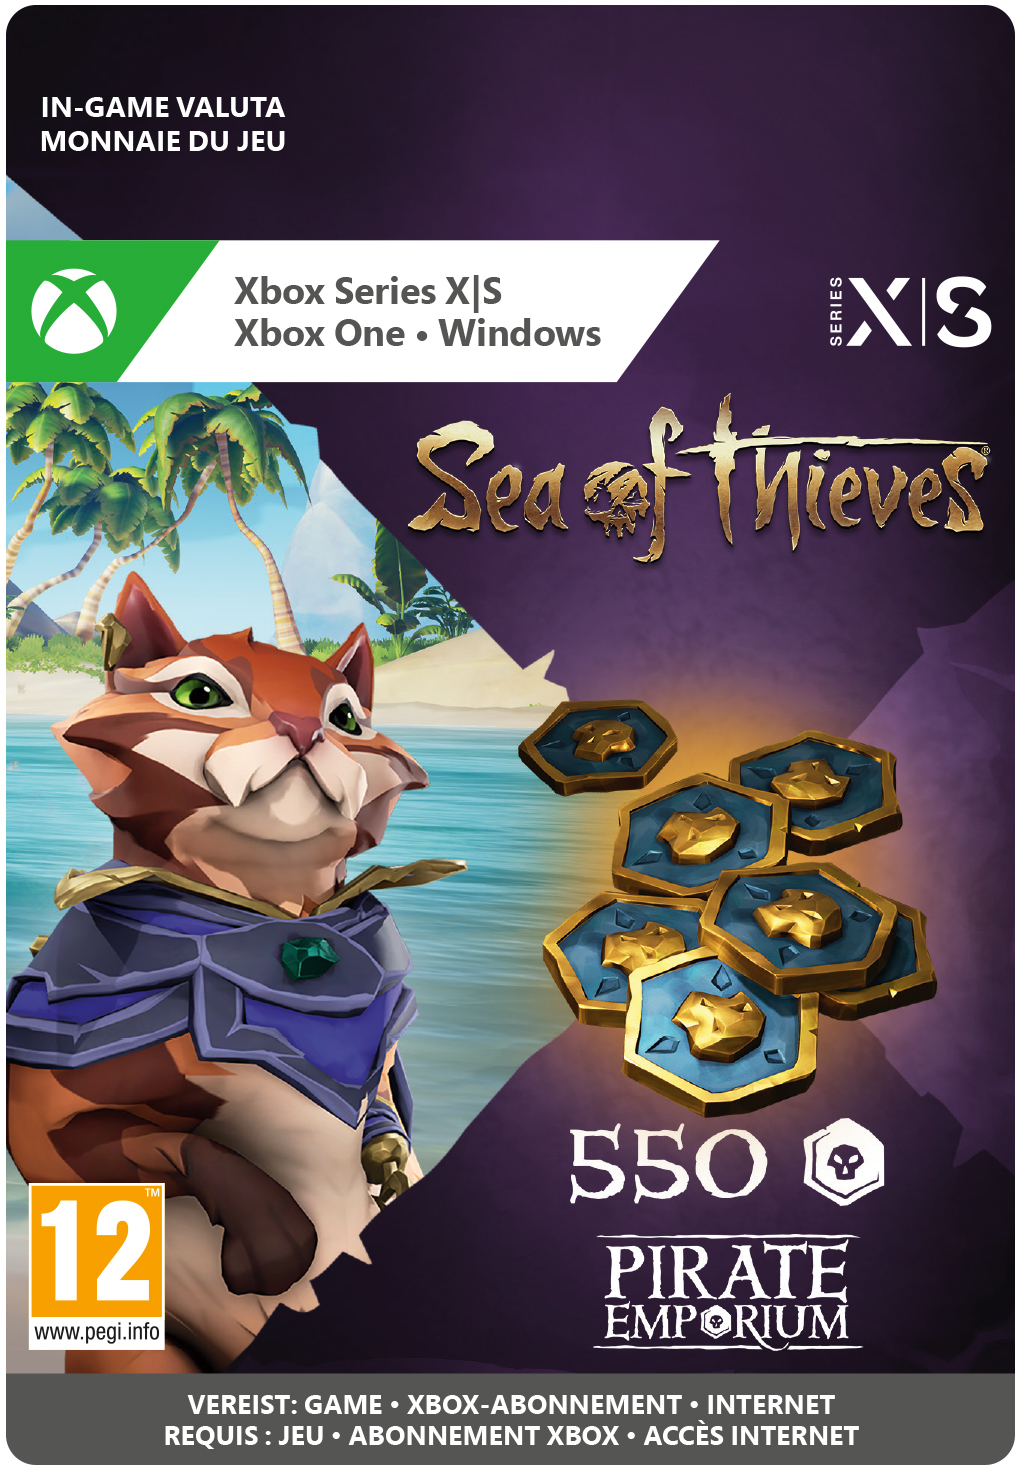 sea of thieves 550